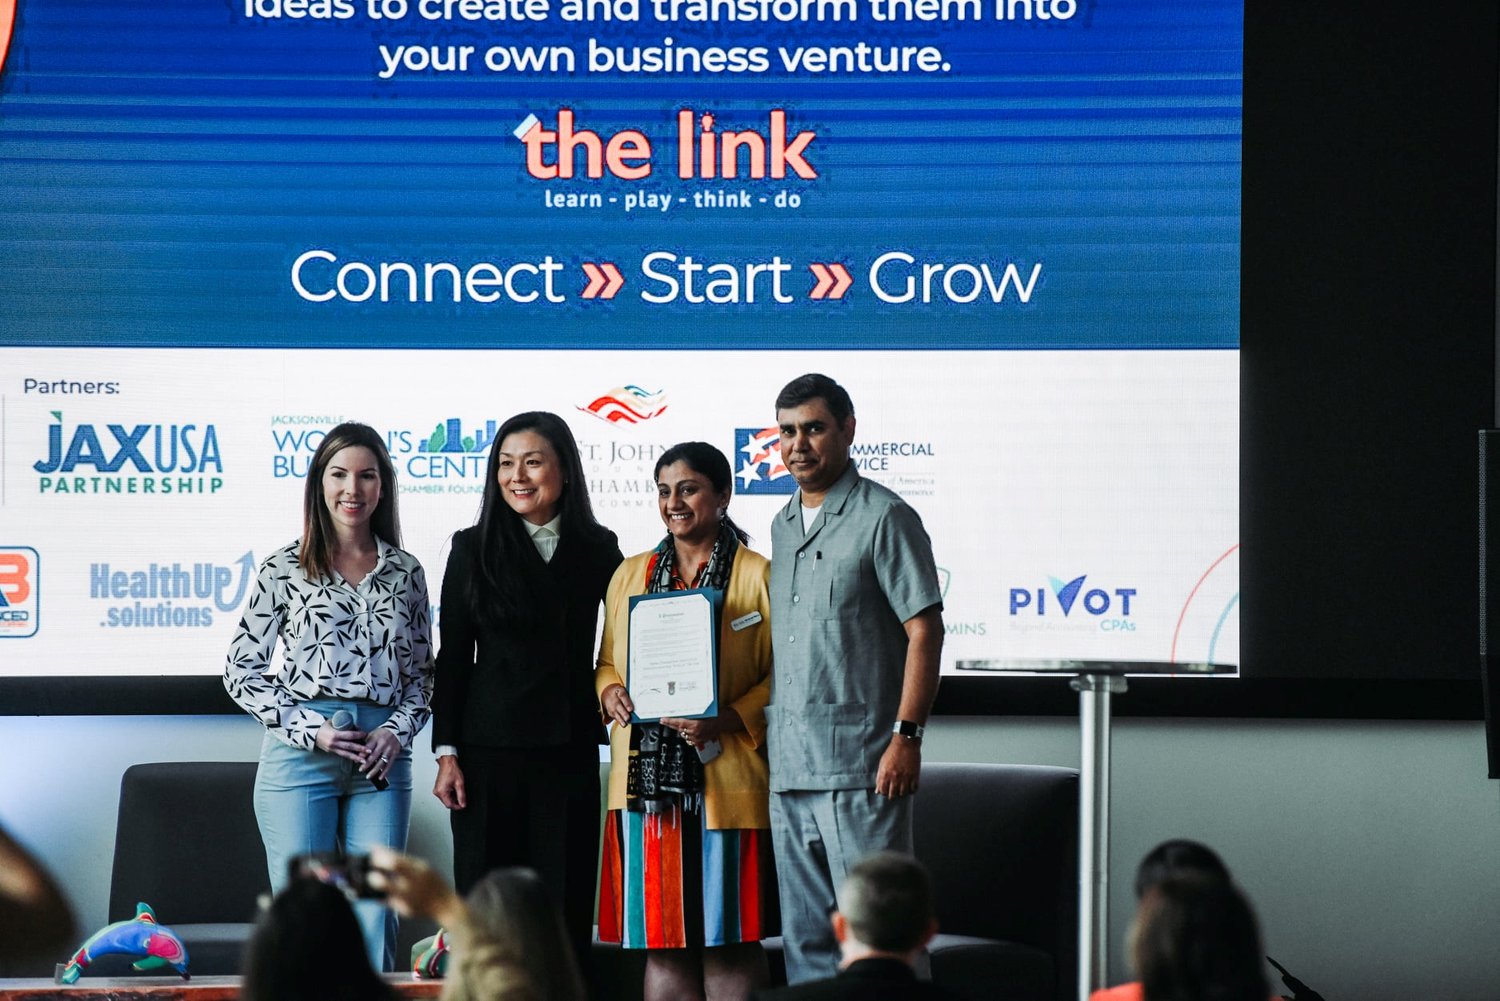 EnterCircle 2021 demonstrated that the entrepreneurship summit was something area residents would support. Pictured from left are Lorena Inclan, director of the St. Johns County Office of Public Affairs; Joy Andrews, deputy county administrator; and Gurpreet and Raghu Misra, link cofounders.